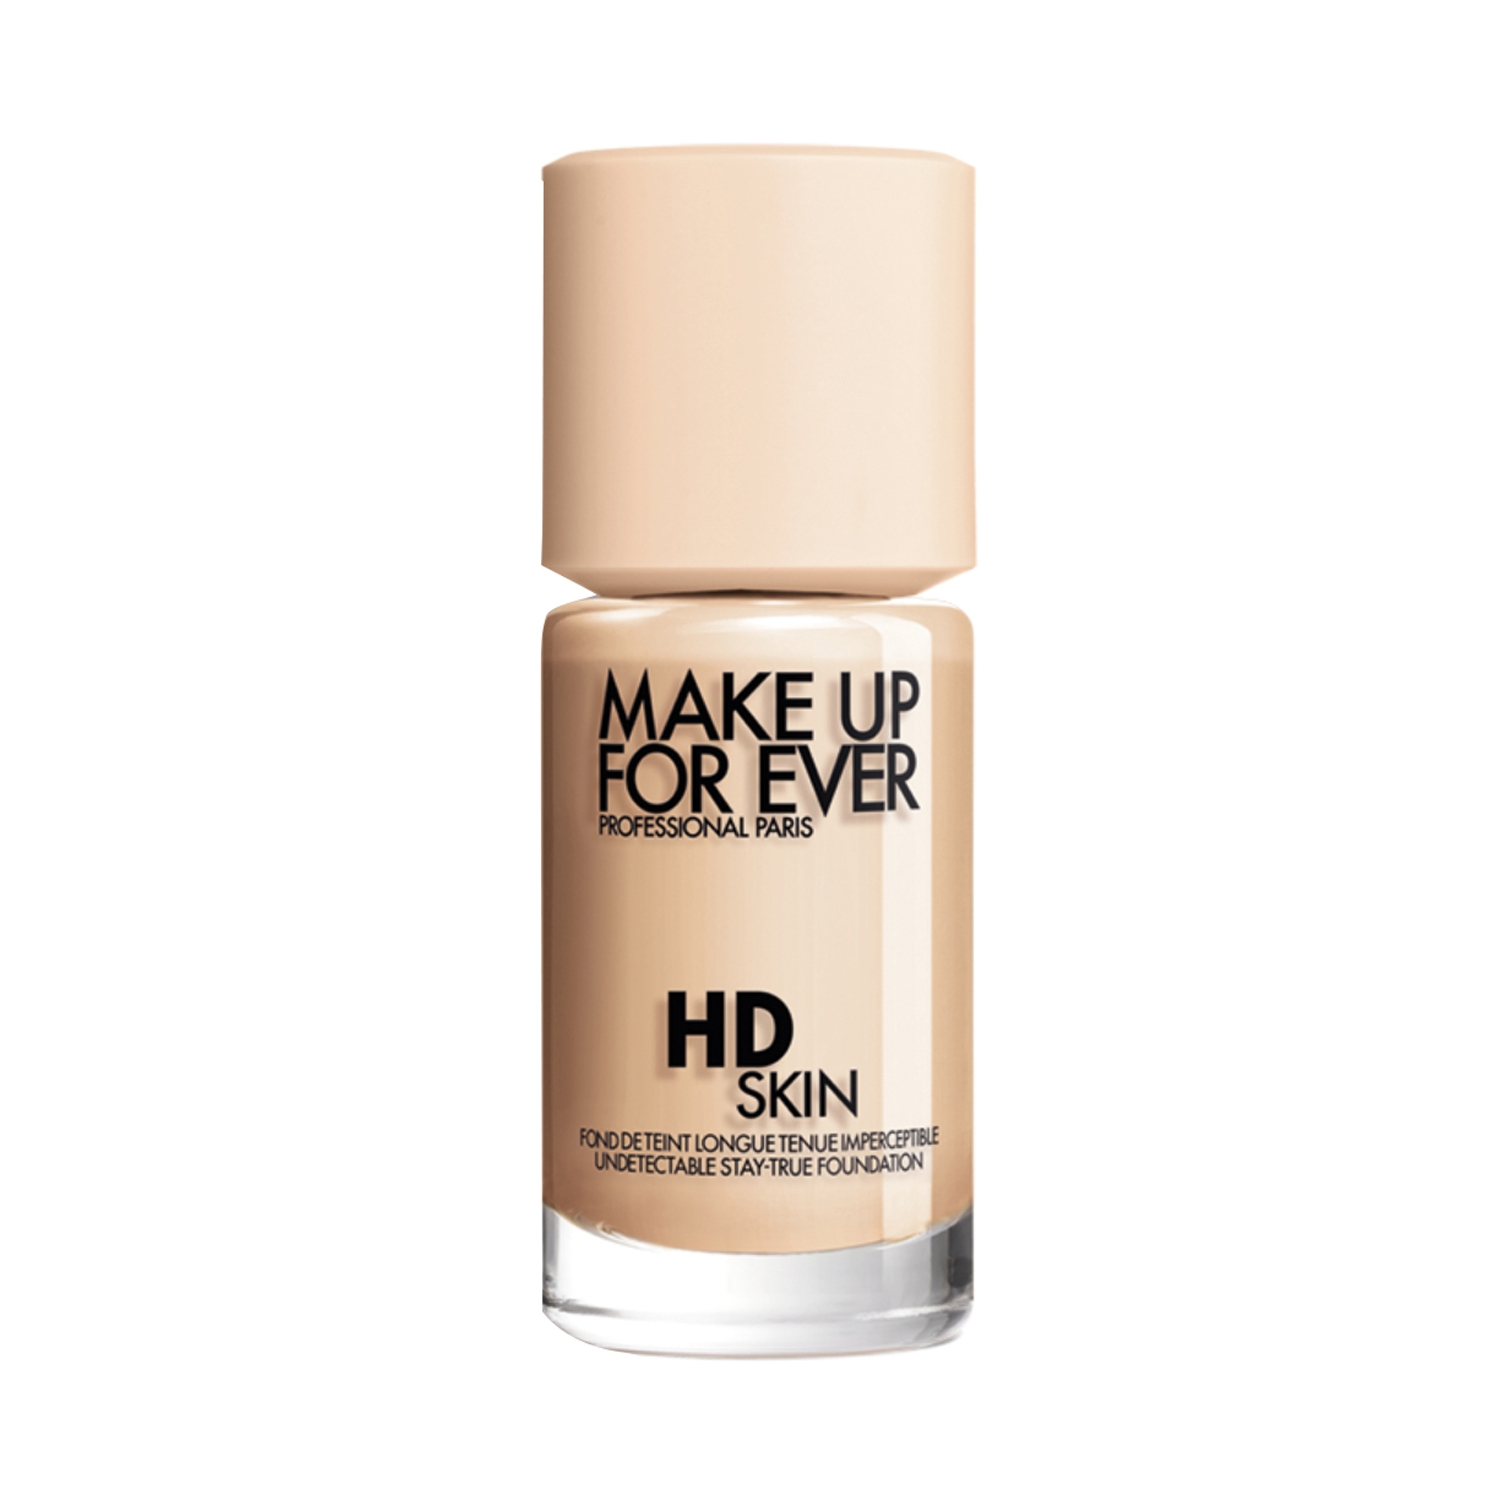 Make Up For Ever | Make Up For Ever Hd Skin Foundation-1N06 (Y218) (30ml)